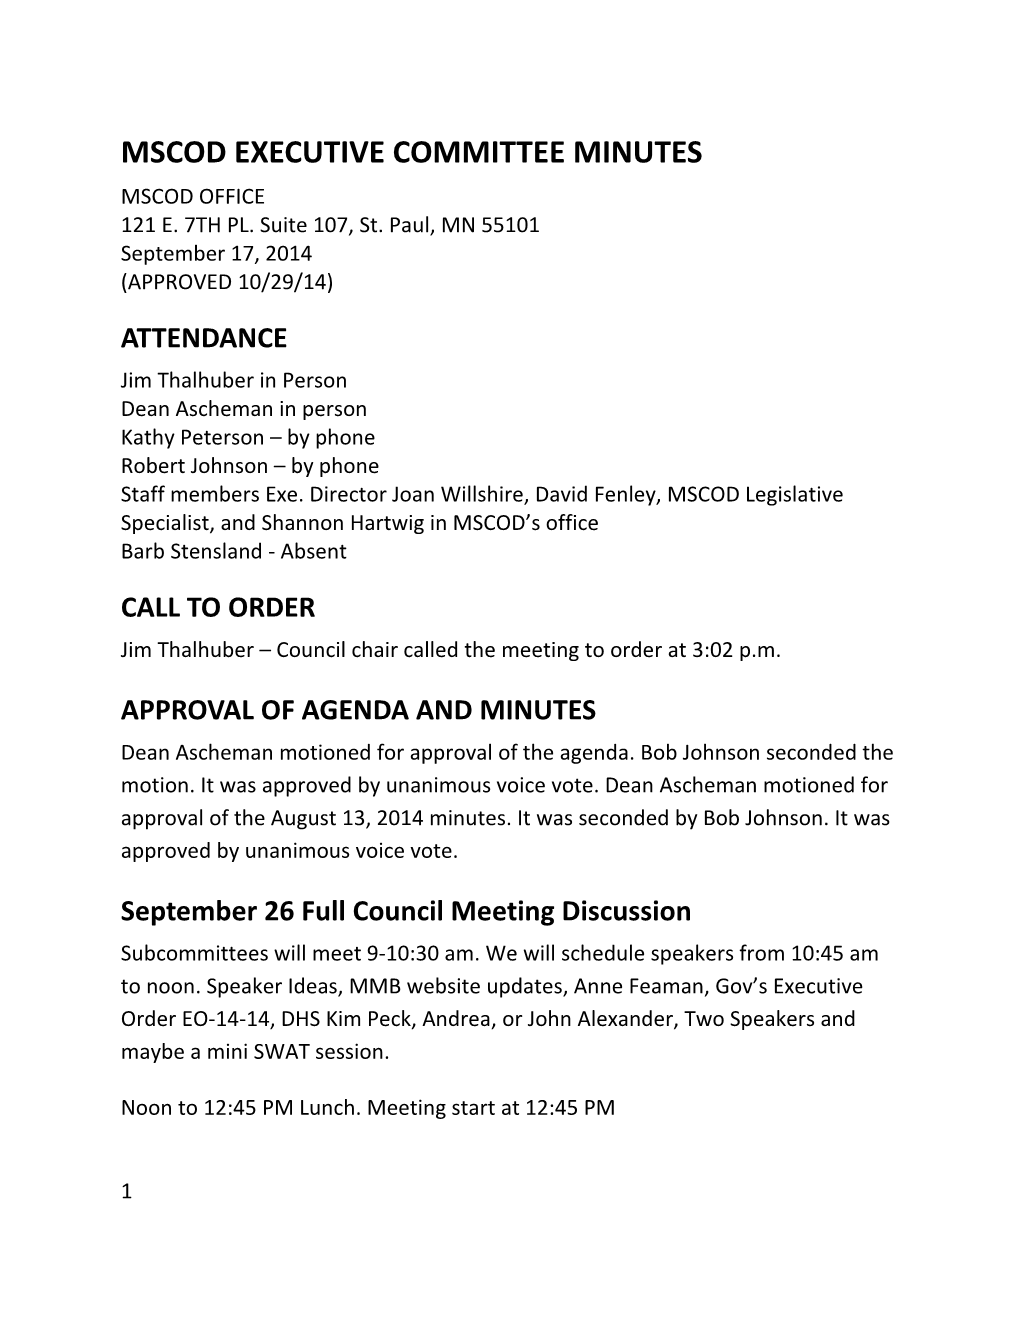 MSCOD Executive Committee Meeting Minutes, 09/17/2014